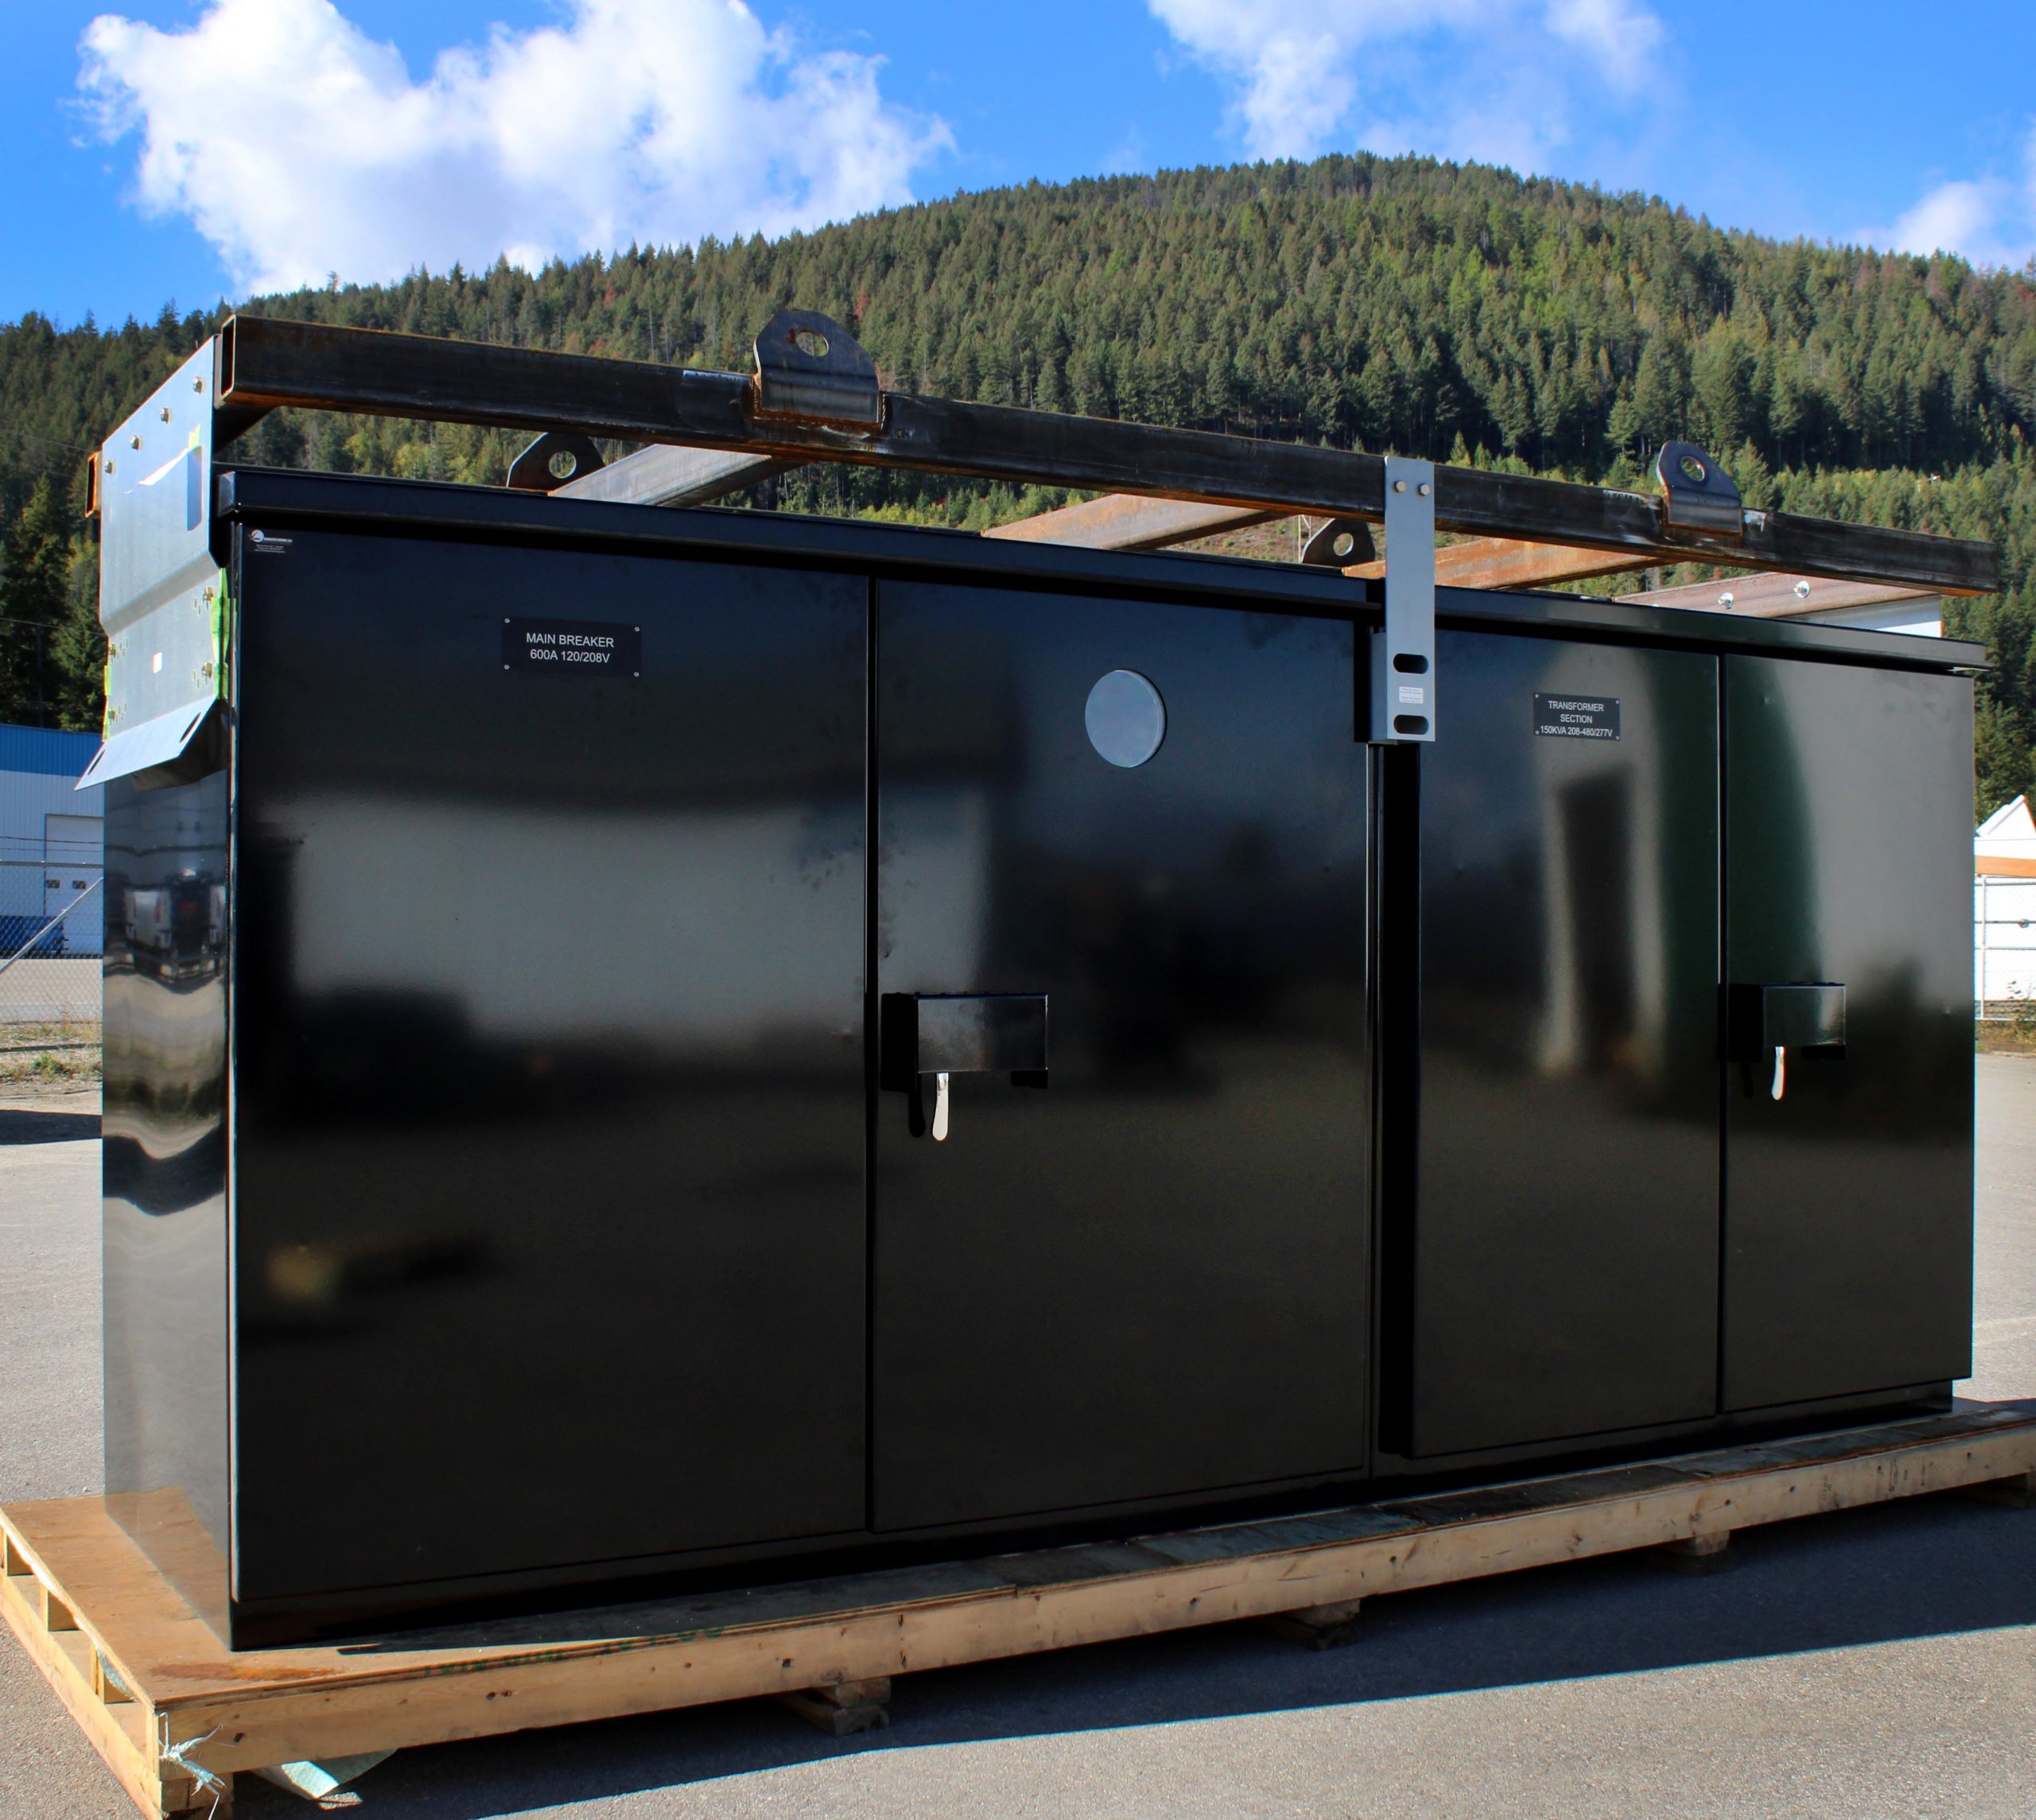 A large black electrical kiosk unit relating to Valid Acquiring West Coast Electric.